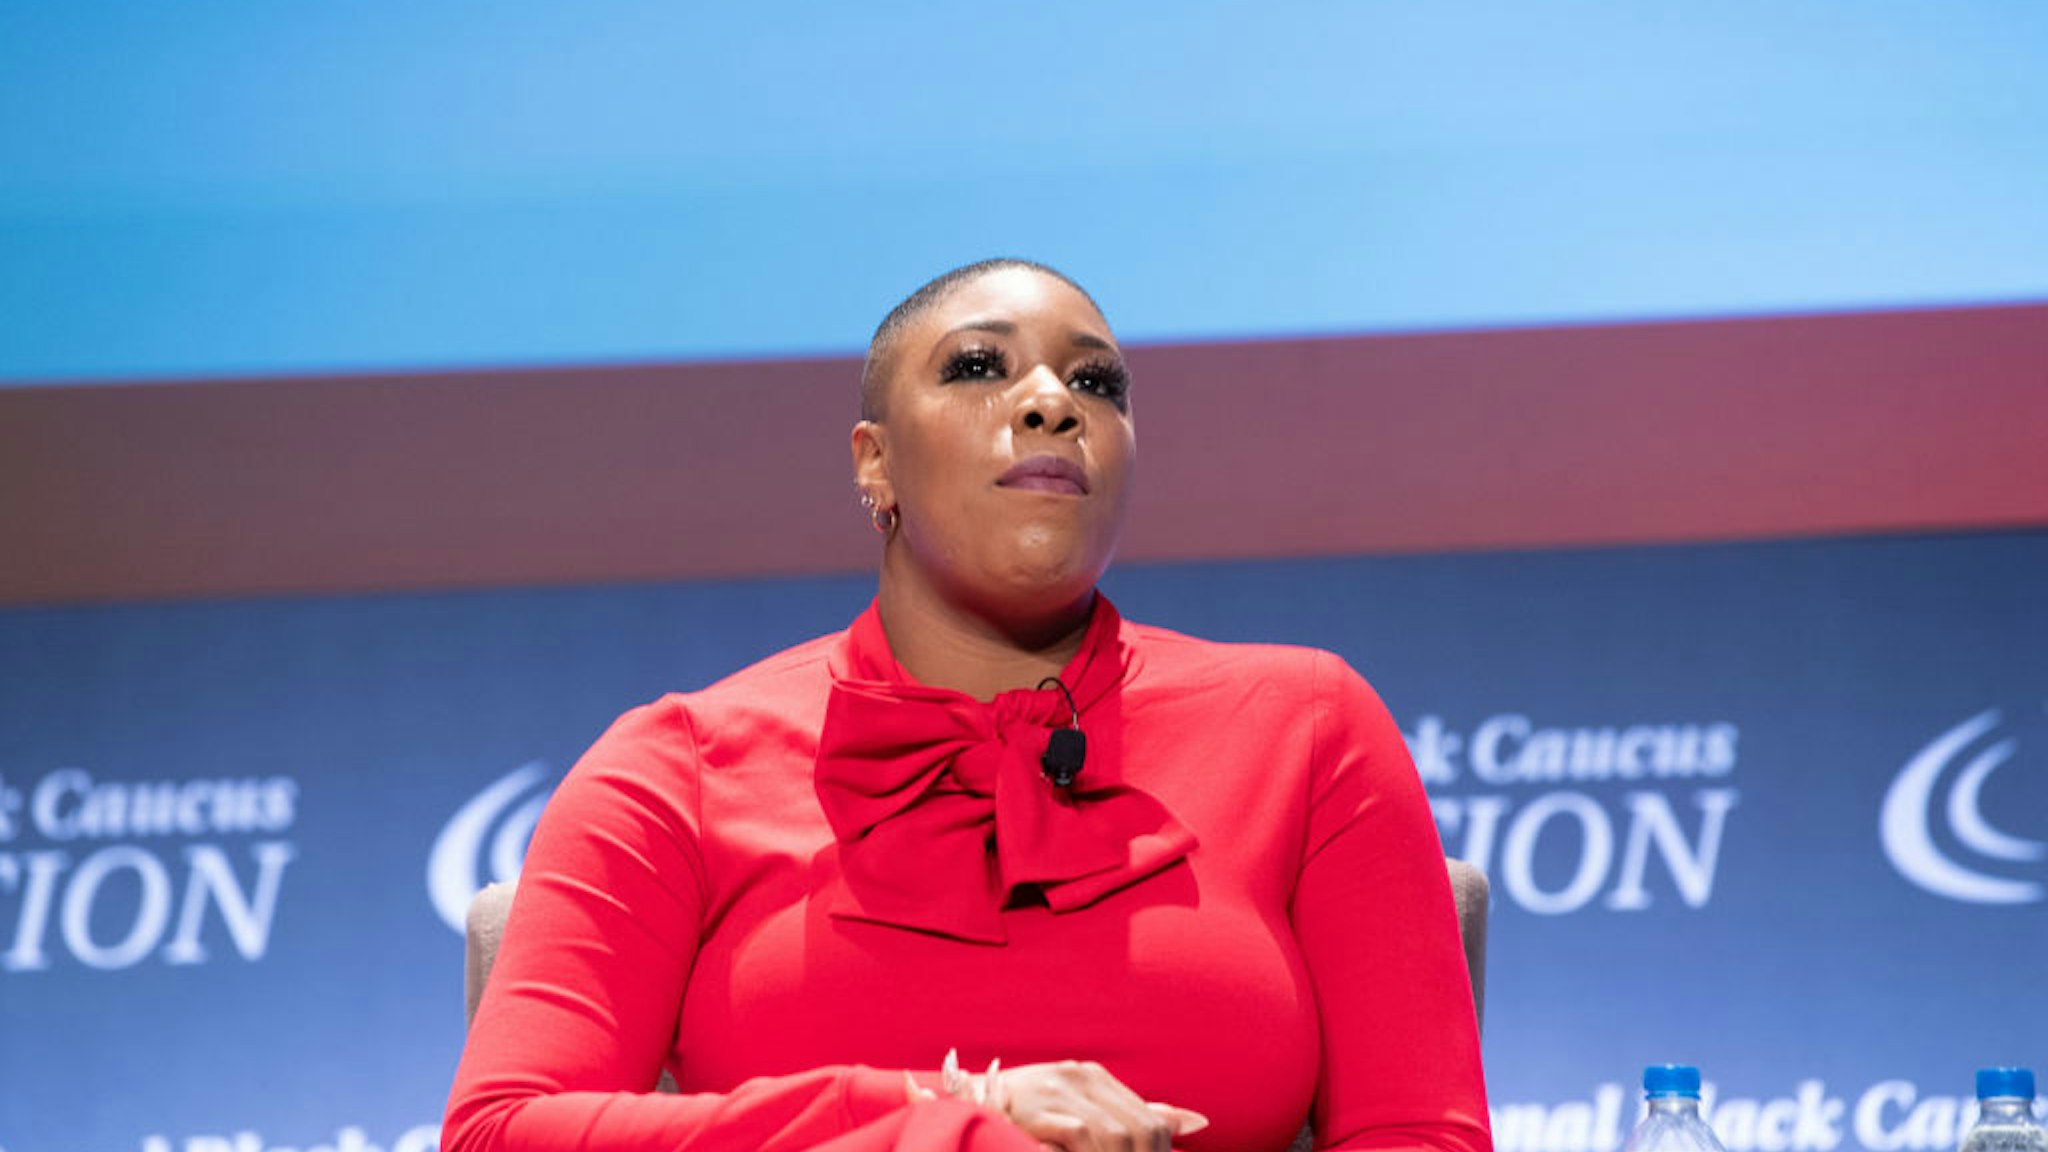 Symone Sanders speaks onstage at the National Town Hall on the second day of the 48th Annual Congressional Black Caucus Foundation on September 13, 2018 in Washington, DC.